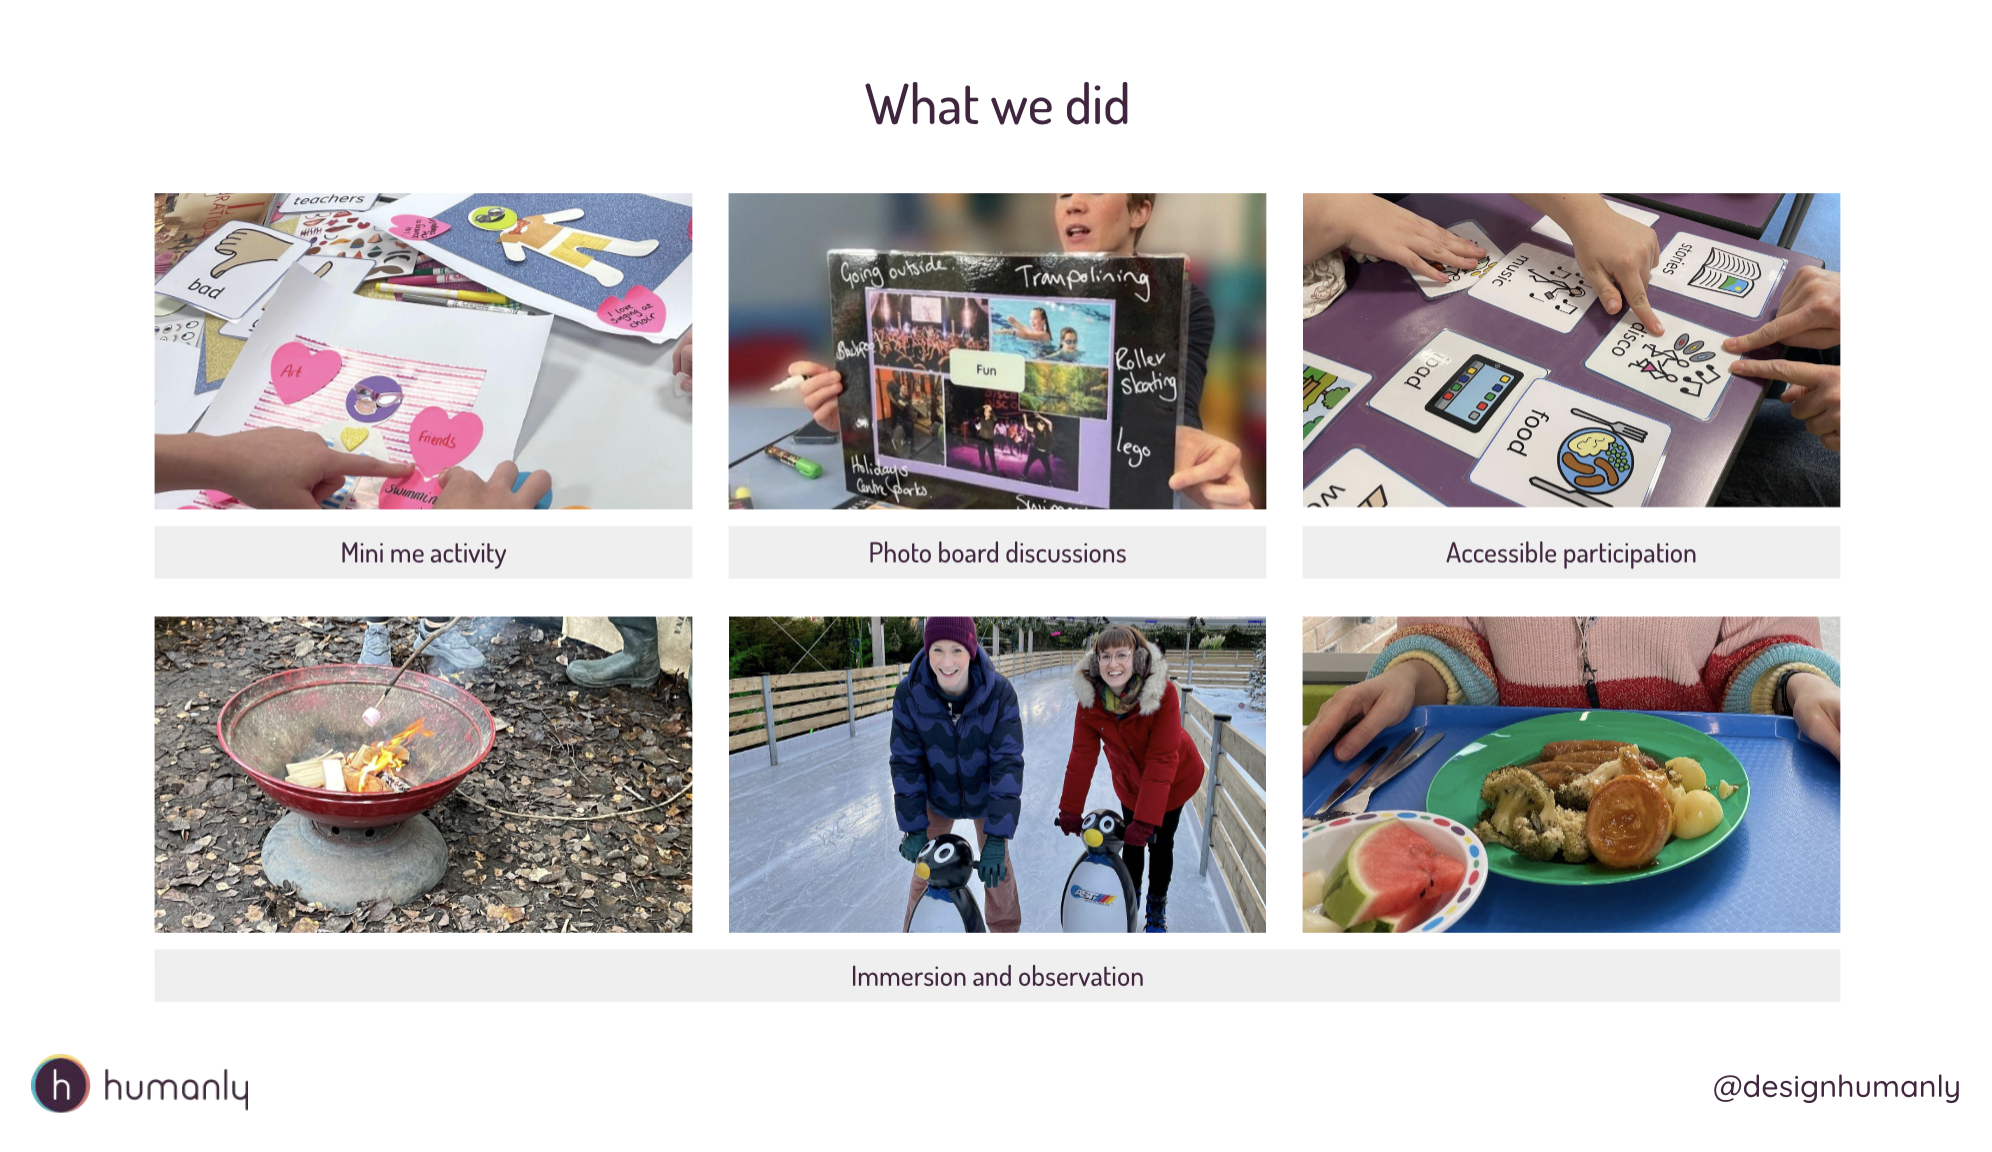 A slide showing activities Humanly did on their project with children - Mini me activity, photo board discussions, accessible participation and immersion and observations